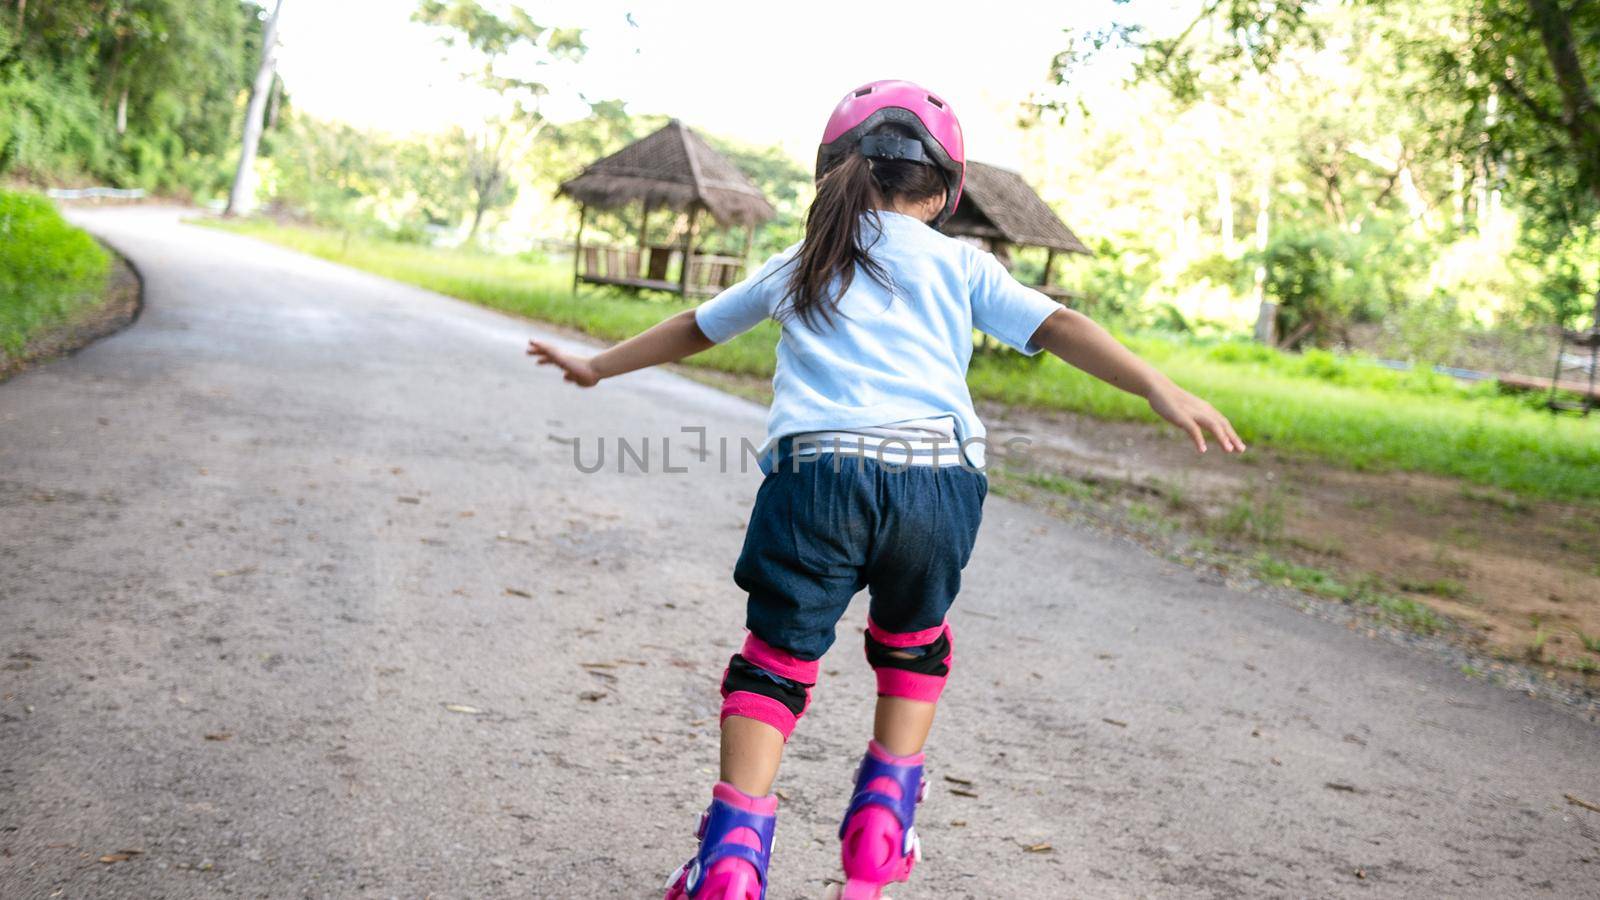 Little girl wearing protection pads and safety helmet learning to roller skate in summer park. Active outdoor sport for kids. by TEERASAK